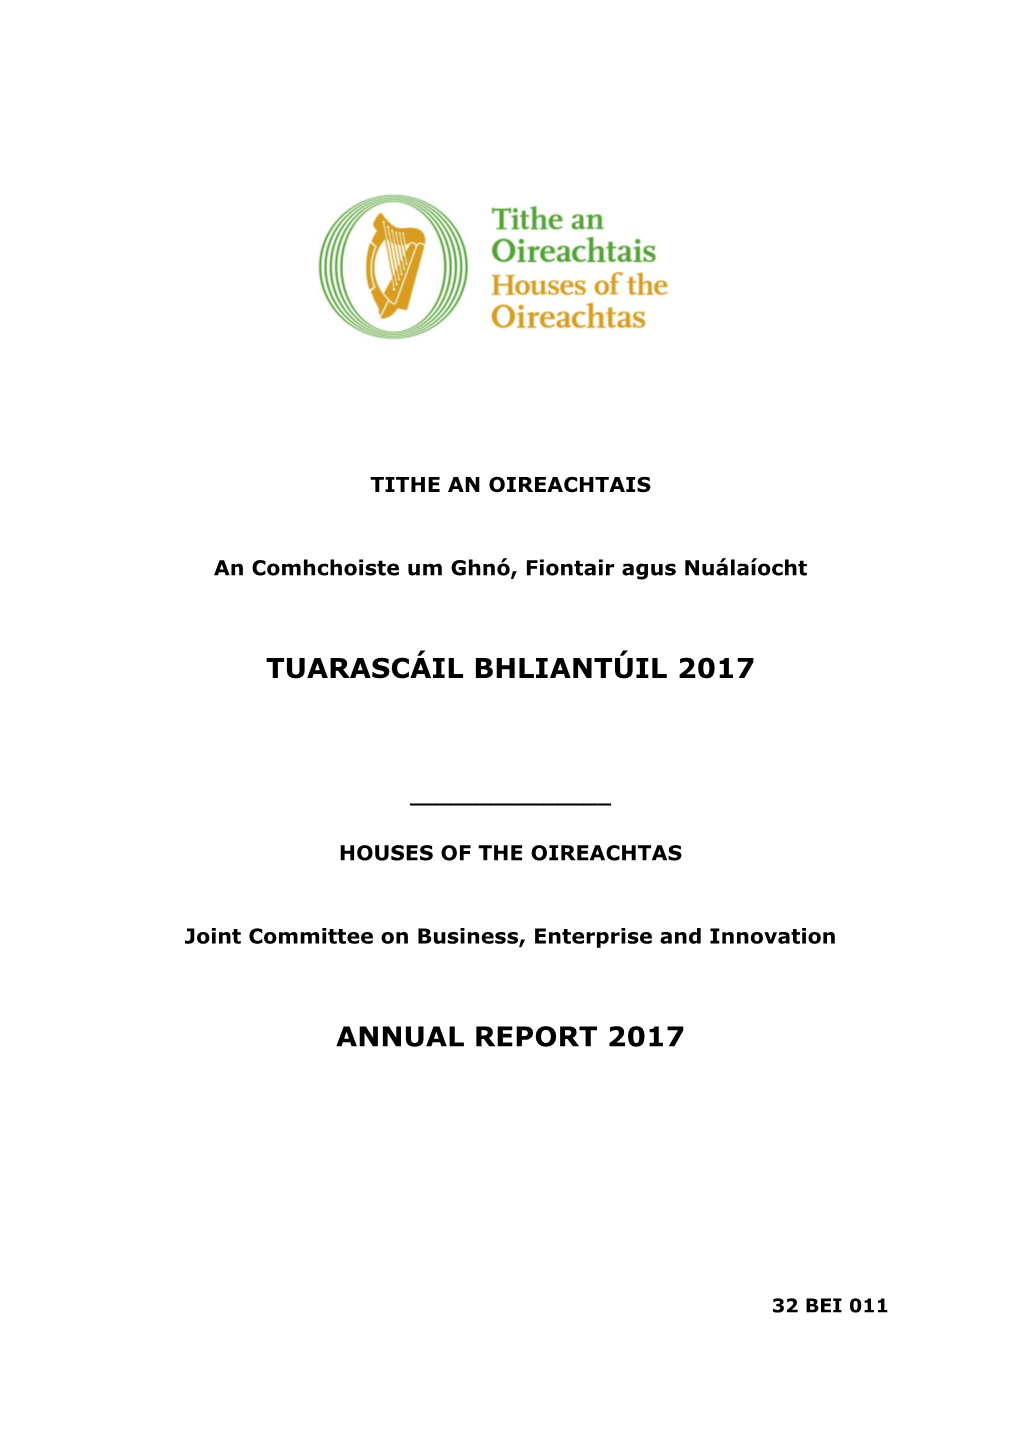 Annual Report 2017, Joint Committee on Business, Enterprise And